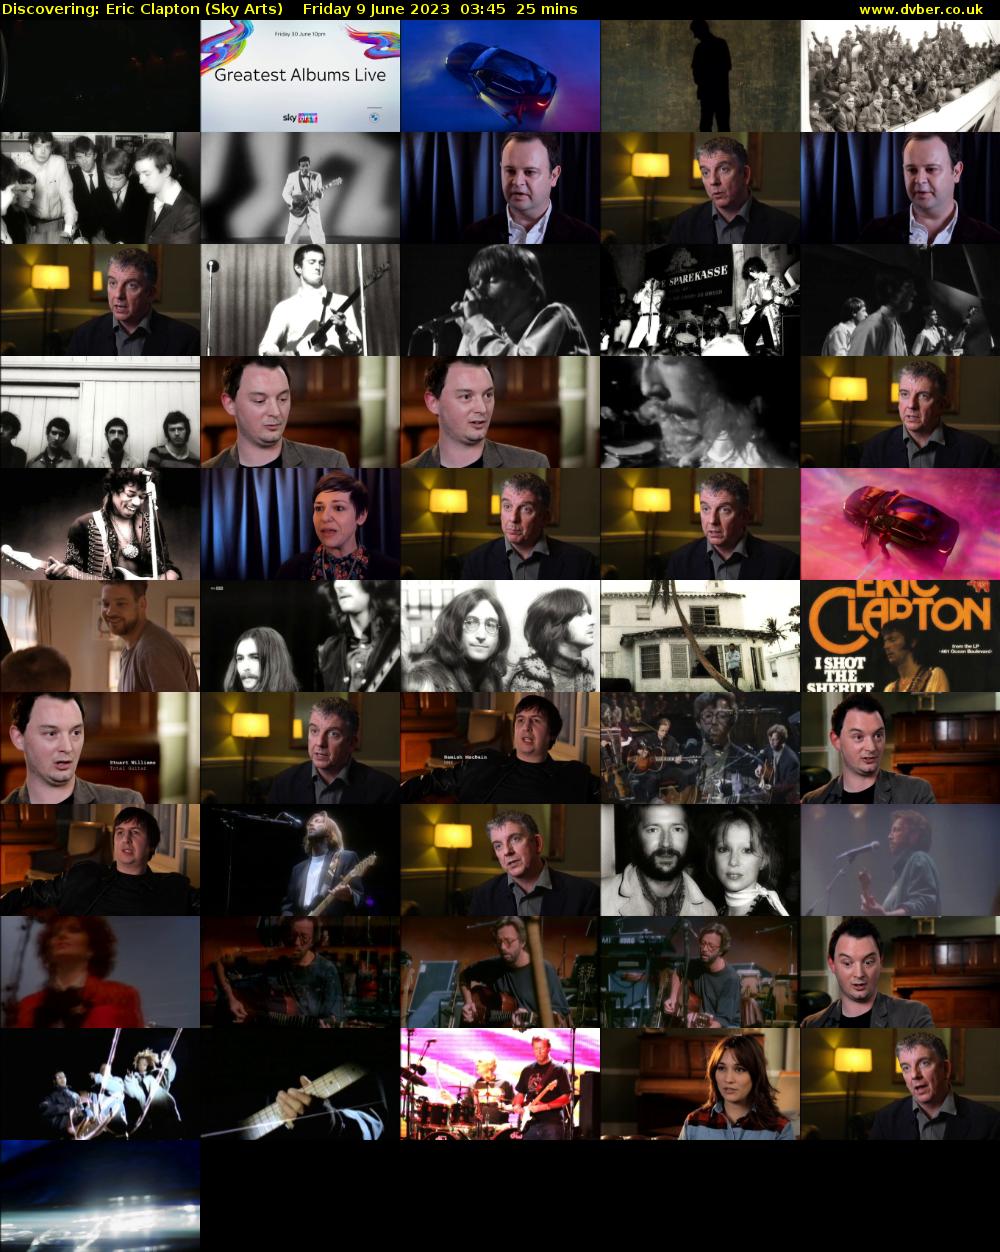 Discovering: Eric Clapton (Sky Arts) Friday 9 June 2023 03:45 - 04:10